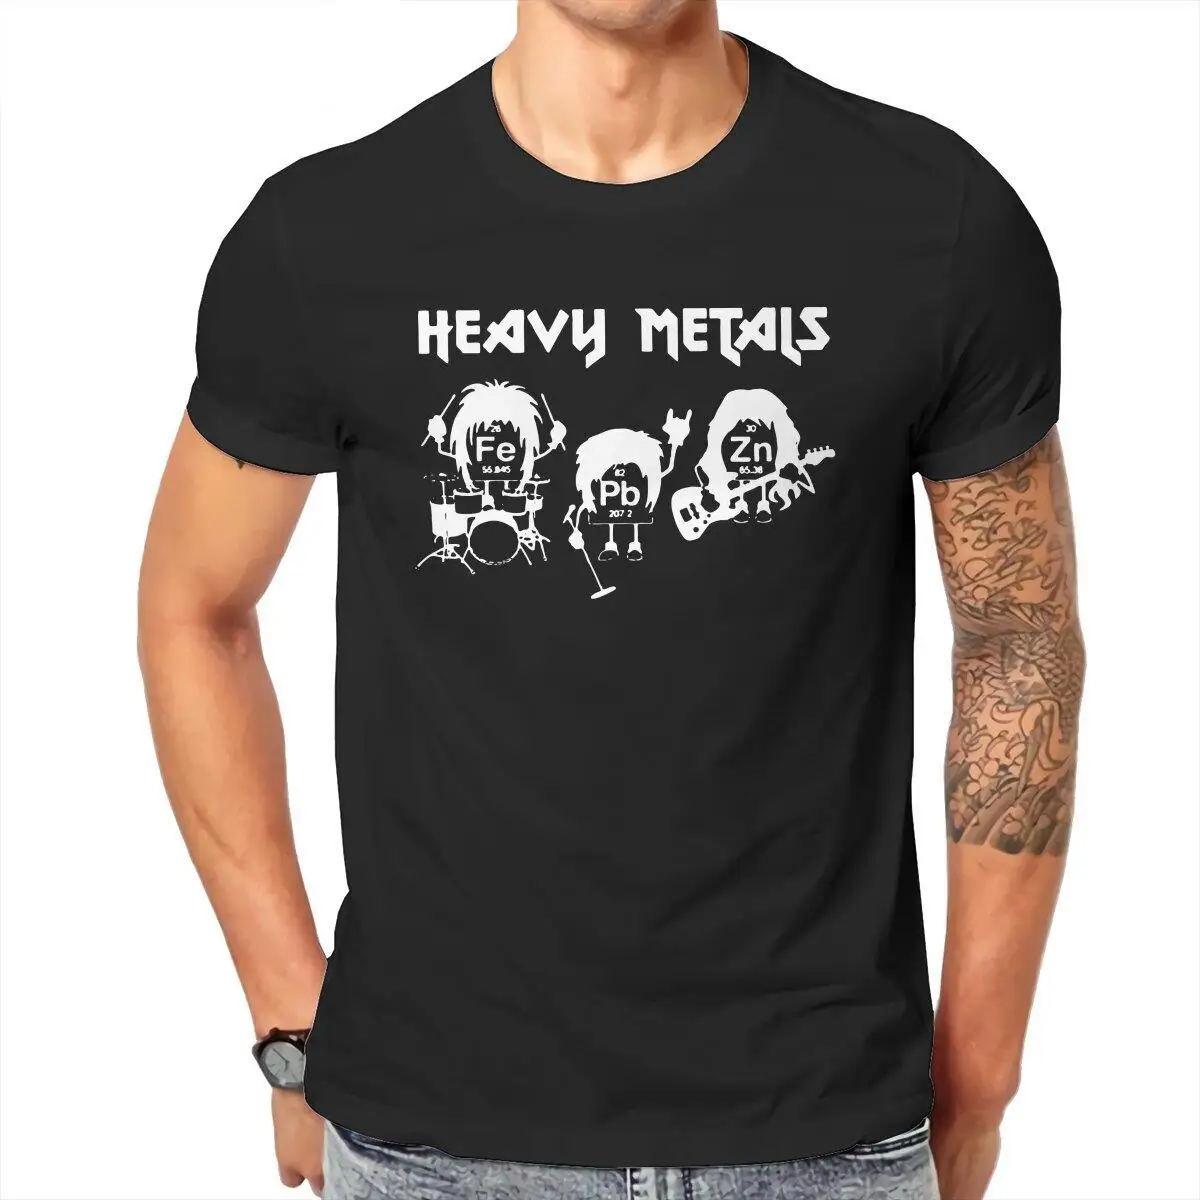 Heavy Metals Chemist  T Shirt Men Cotton Vintage T-Shirt Science Elements Periodic Table Tee Shirt Short Sleeve Clothing Party